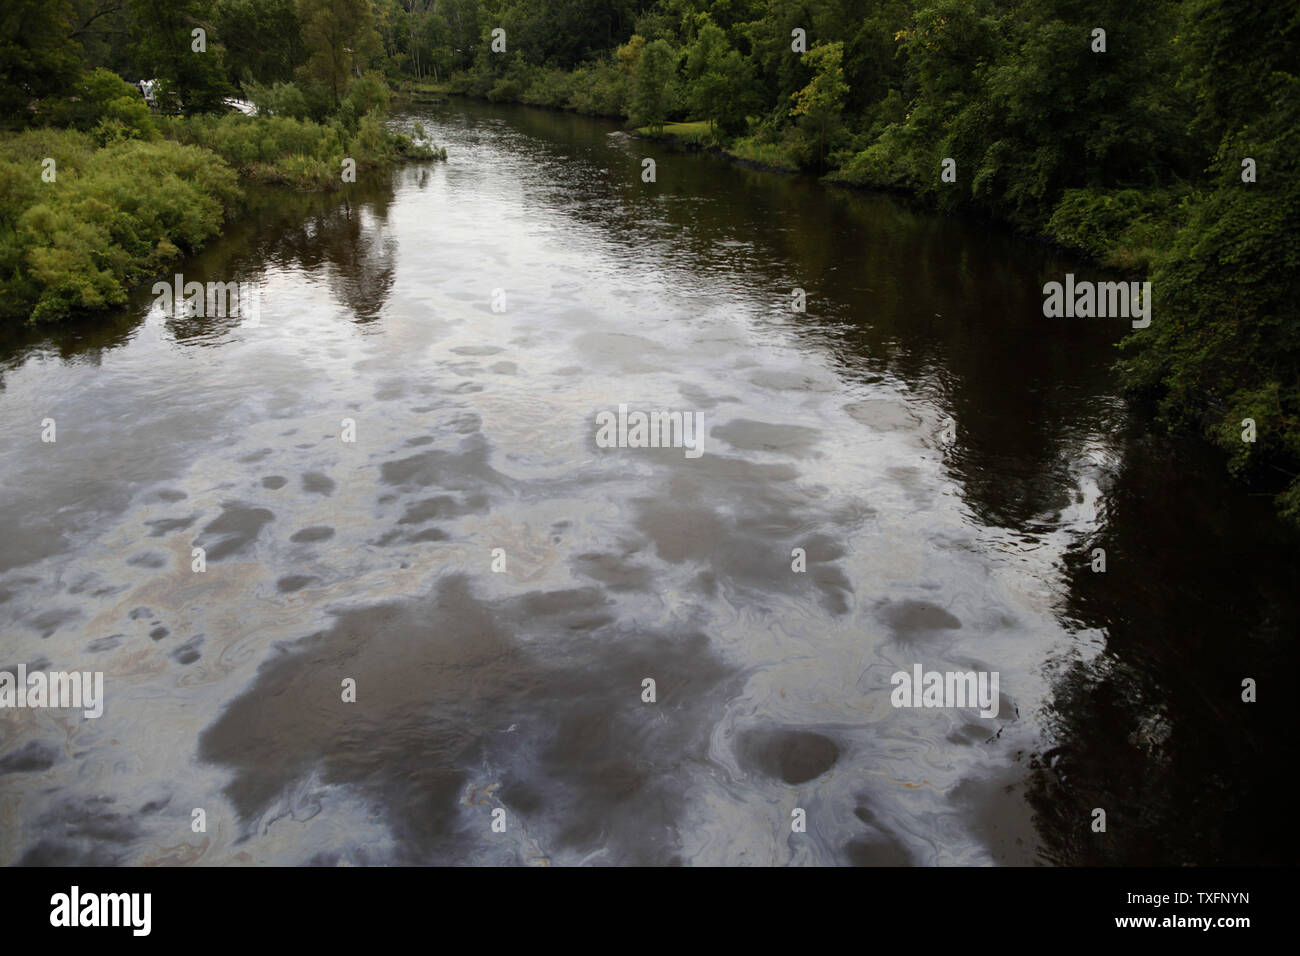 Oil flows down the Kalamazoo River near Battle Creek, Michigan on July 30, 2010. A 30-inch-diameter pipeline ruptured sometime between Sunday night and Monday morning, sending between 800,000 and 1 million gallons of oil into nearby Talmadge Creek and the Kalamazoo River.     UPI/Brian Kersey Stock Photo